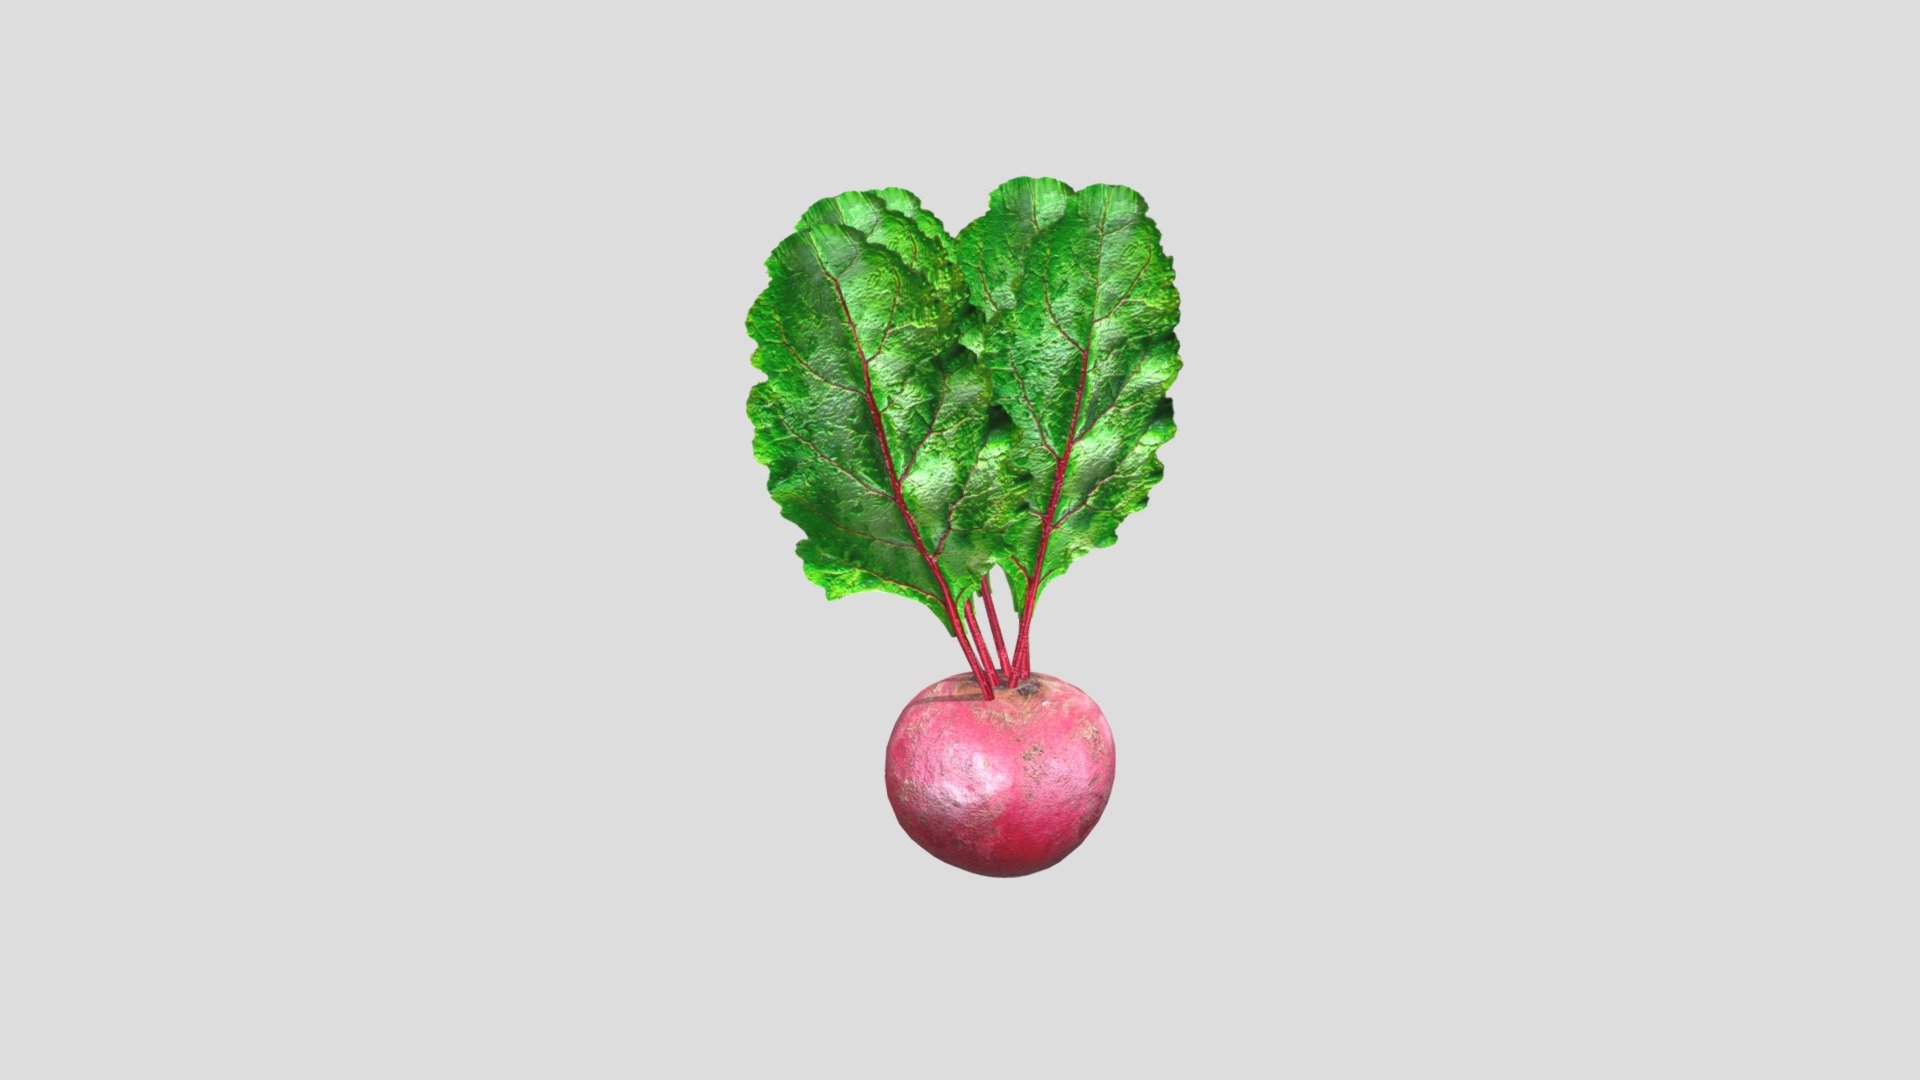 3d model of a Beetroot. Perfect for games, scenes or renders.

Model is correctly divided into main parts. All main parts are presented as separate parts therefore materials of objects are easy to be modified or removed and standard parts are easy to be replaced.

TEXTURES: Models includes high textures with maps: Base Color (.png) Height (.png) Metallic (.png) Normal (.png) Roughness (.png)

FORMATS: .obj .dae .stl .blend .fbx .3ds

GENERAL: Easy editable. Model is fully textured.

Vertices:1.2k Polygons: 1.2k

All formats have been tested and work correctly.

Some files may need textures or materials adjusted or added depending on the program they are imported into 3d model